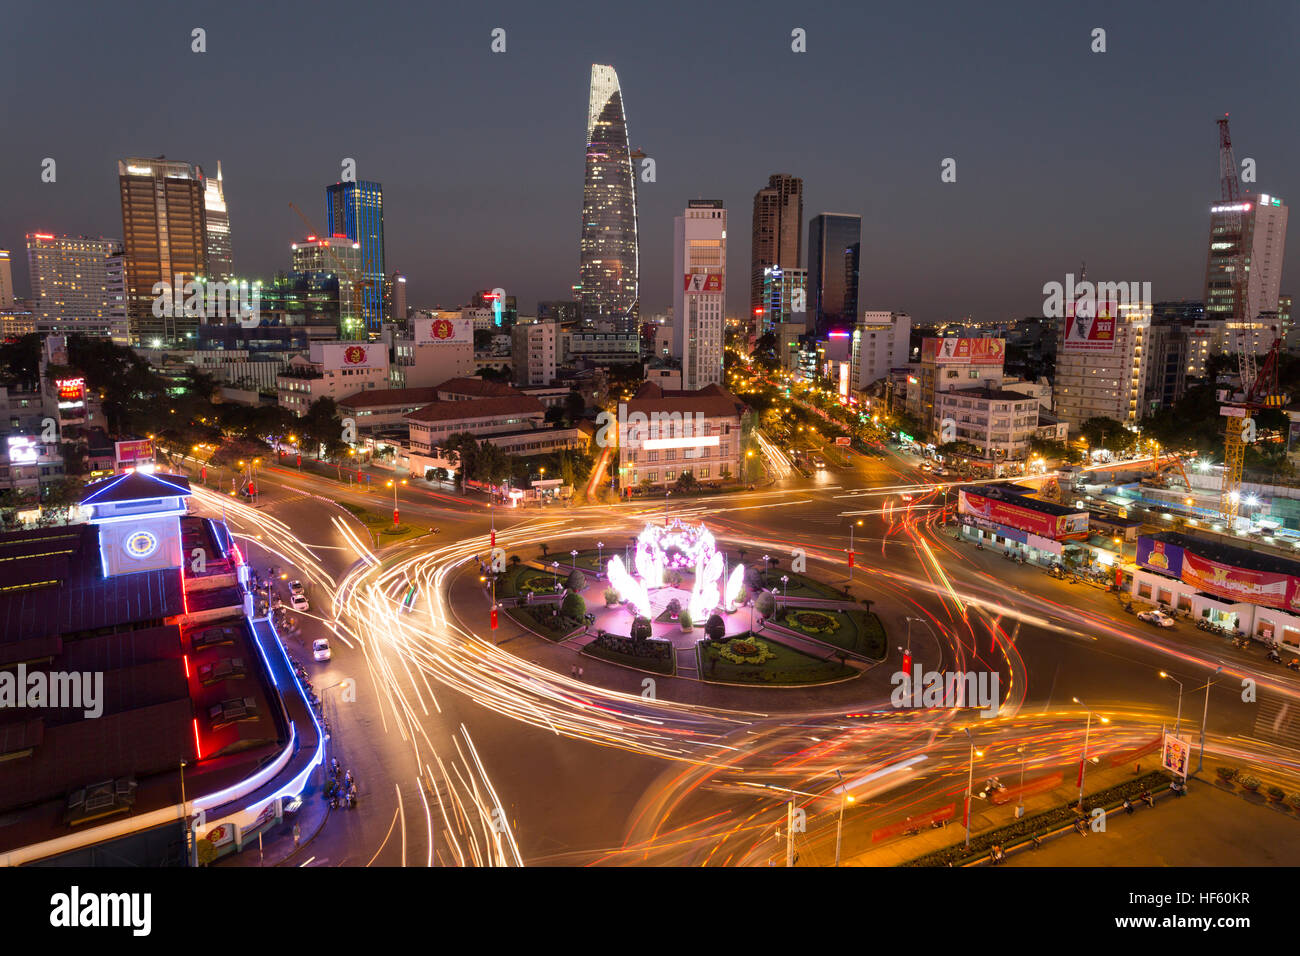 Dusk twilight skyline cityscape view of District 1 and Bitexco Financial Tower in Ho Chi Minh City, Vietnam. Stock Photo